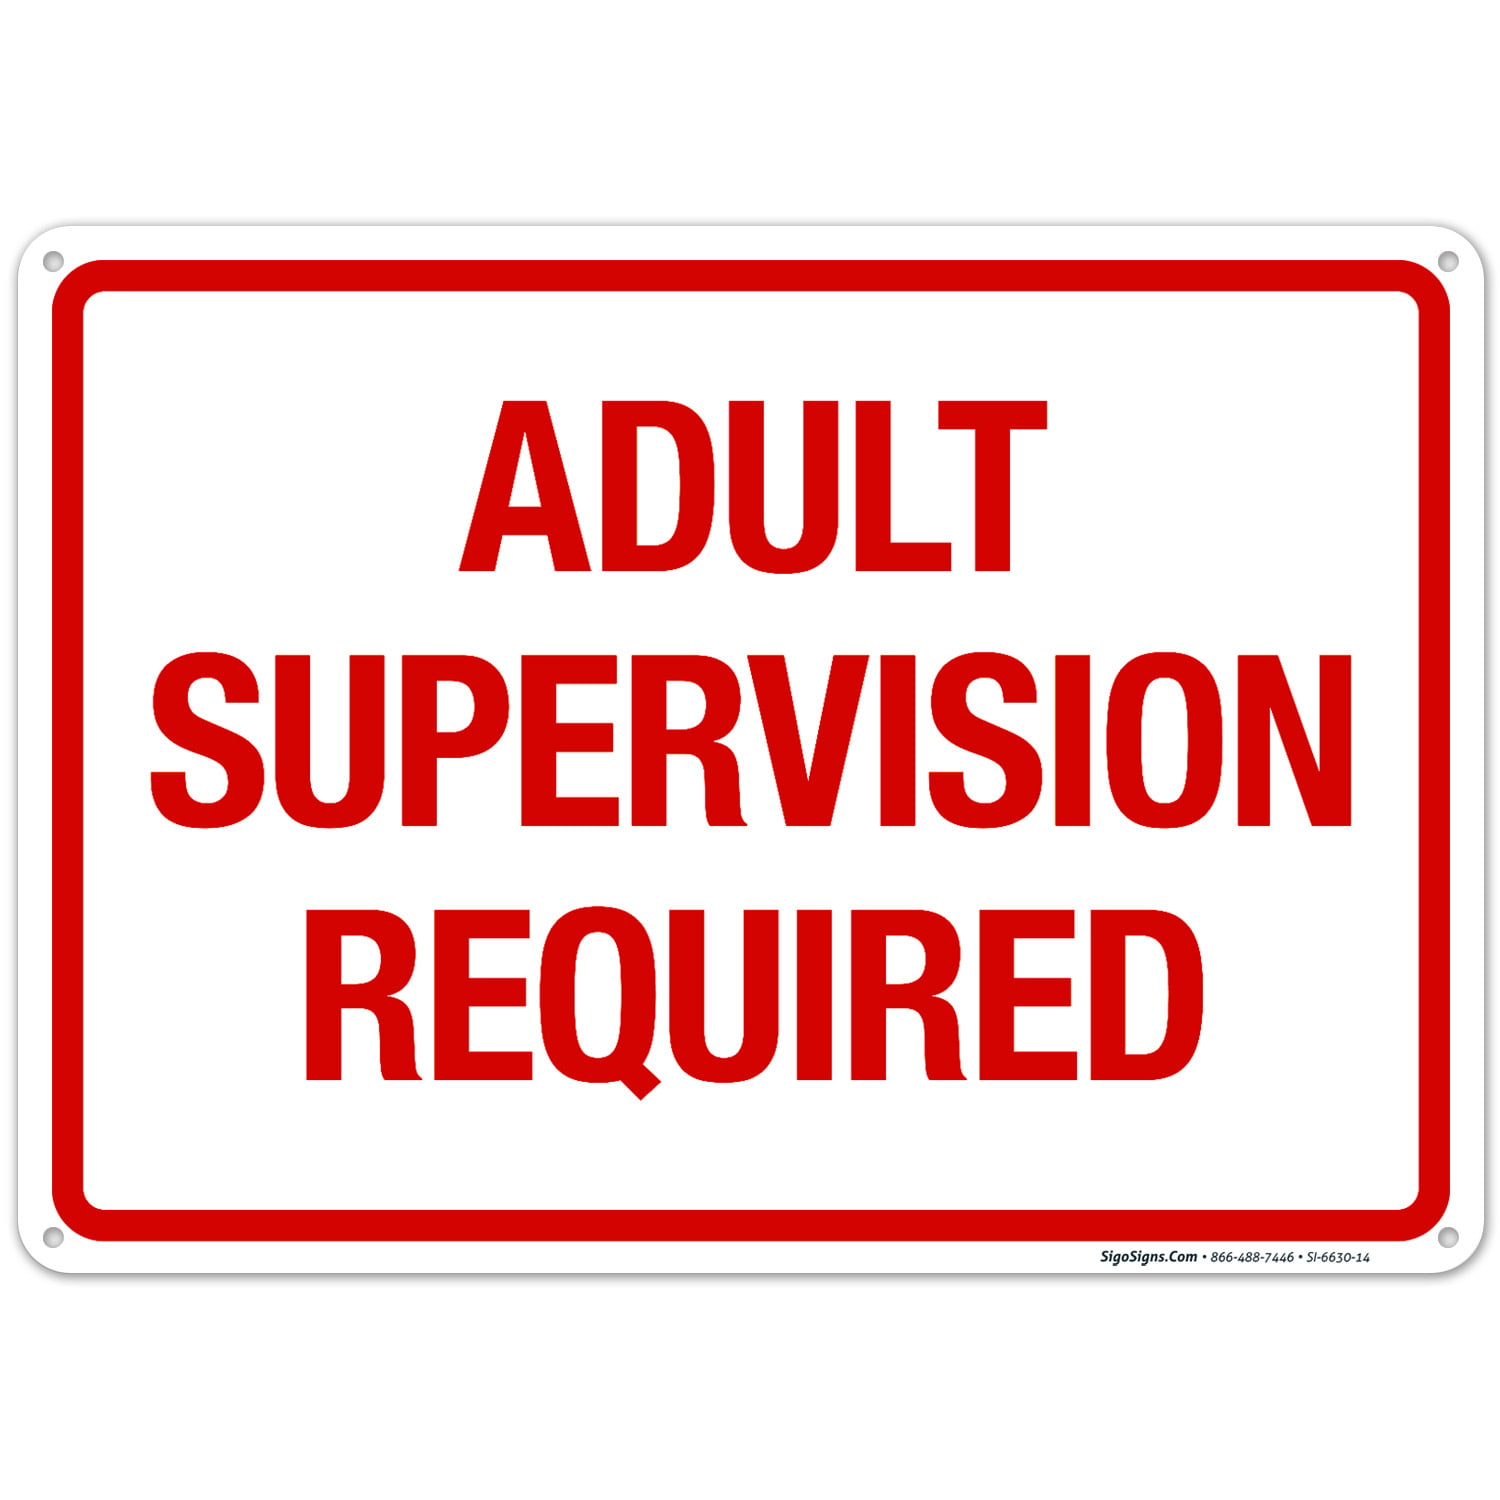 ADULT SUPERVISION REQUIRED 12" x 8" Aluminum Metal Novelty Sign 